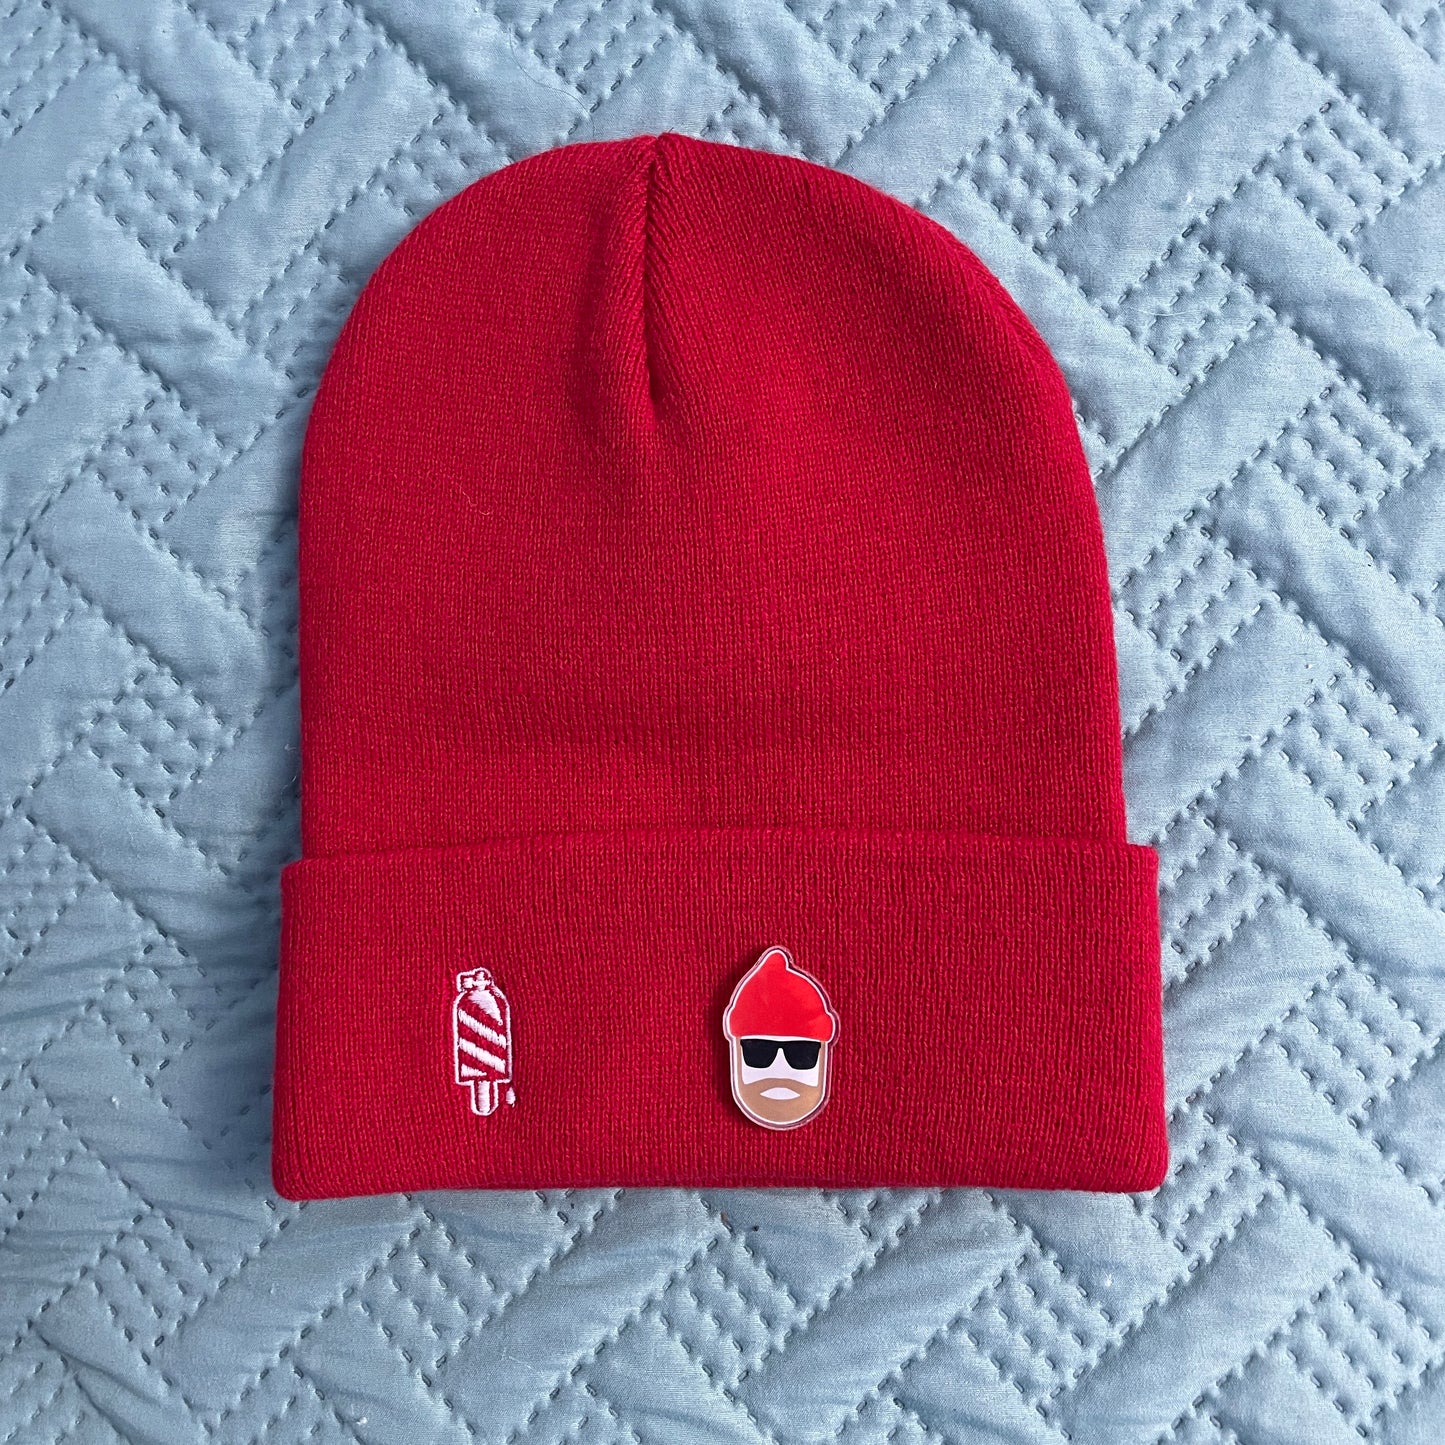 Scuba diver acrylic pin on red beanie